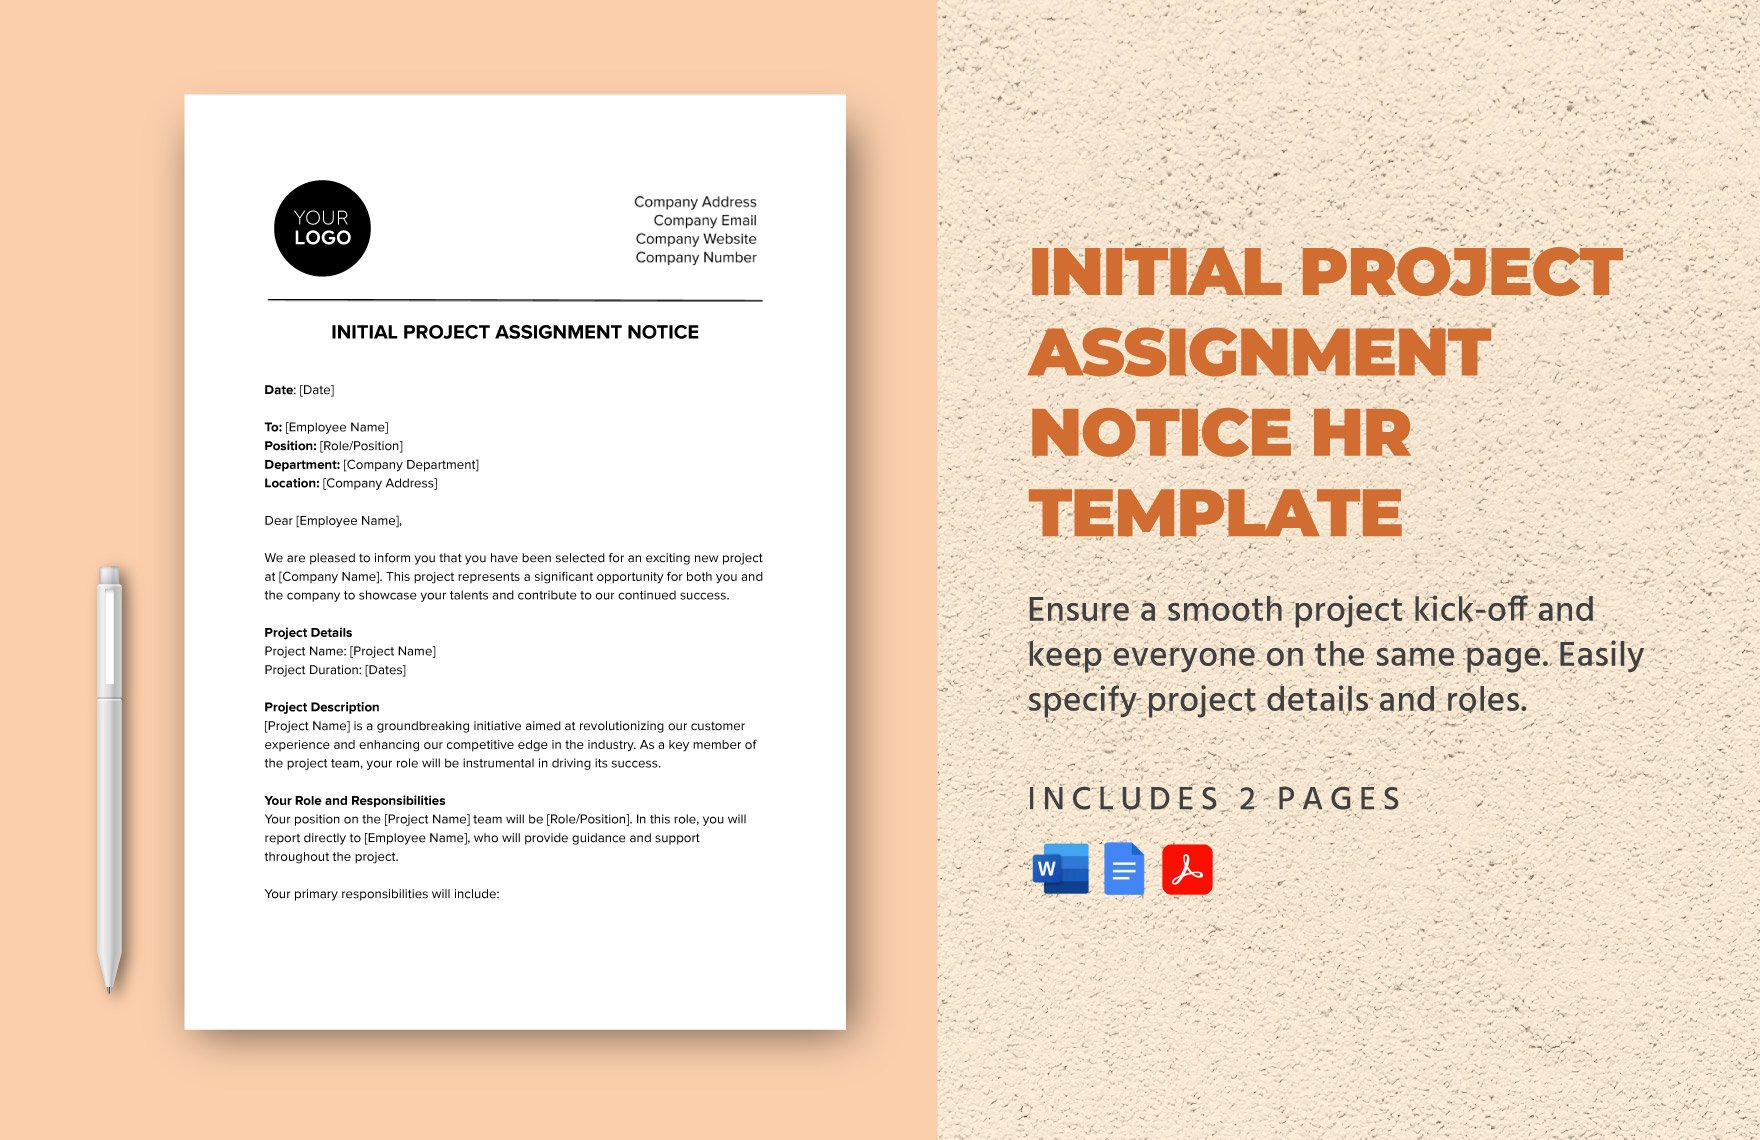 Initial Project Assignment Notice HR Template in Word, Google Docs, PDF